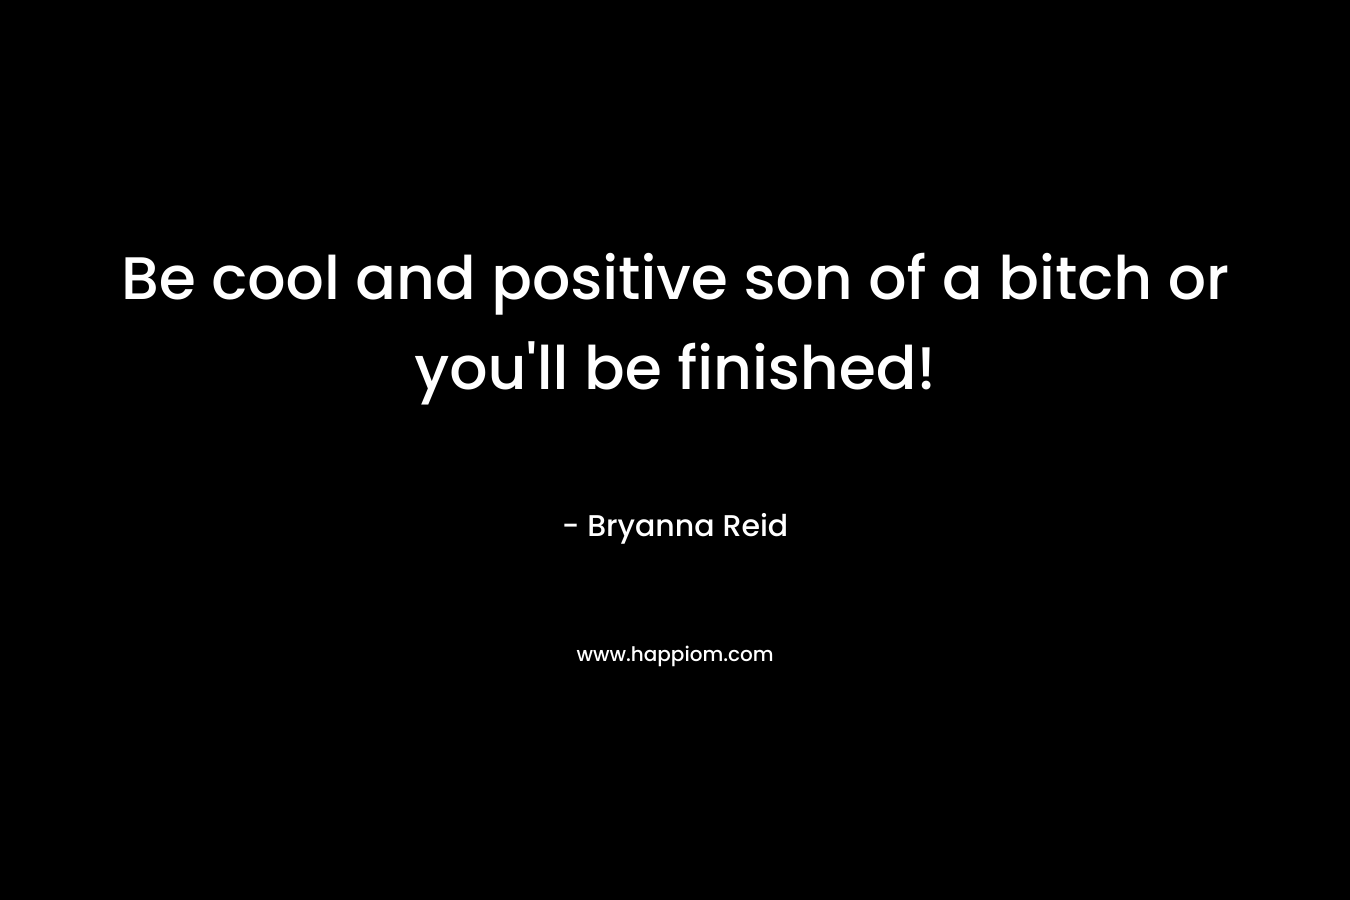 Be cool and positive son of a bitch or you'll be finished!